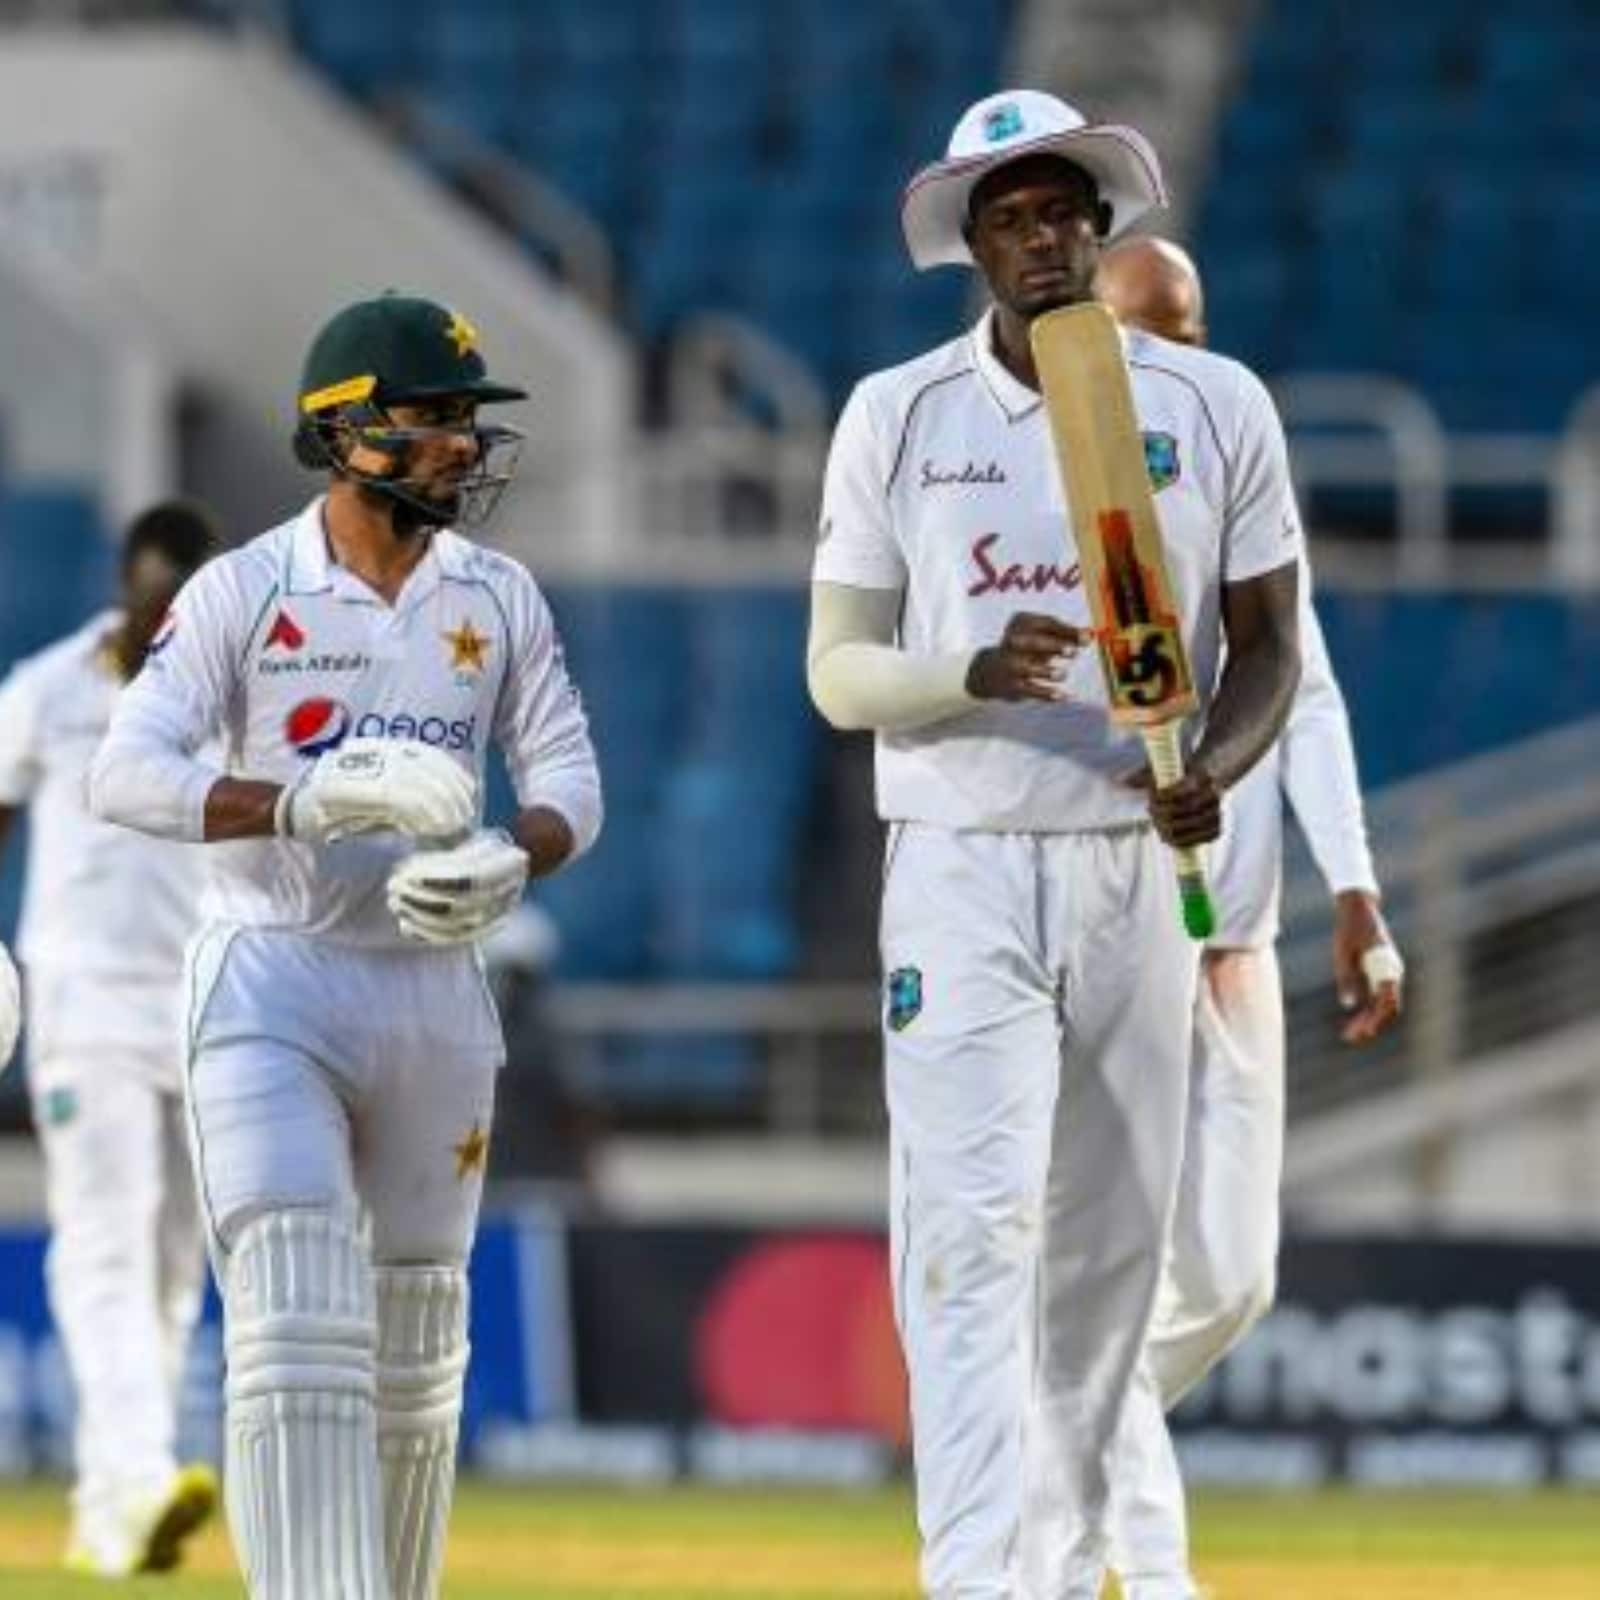 Live Streaming Cricket Streaming WI vs PAK, 2nd Test When and Where to Watch West Indies vs Pakistan 2021 Online And in India